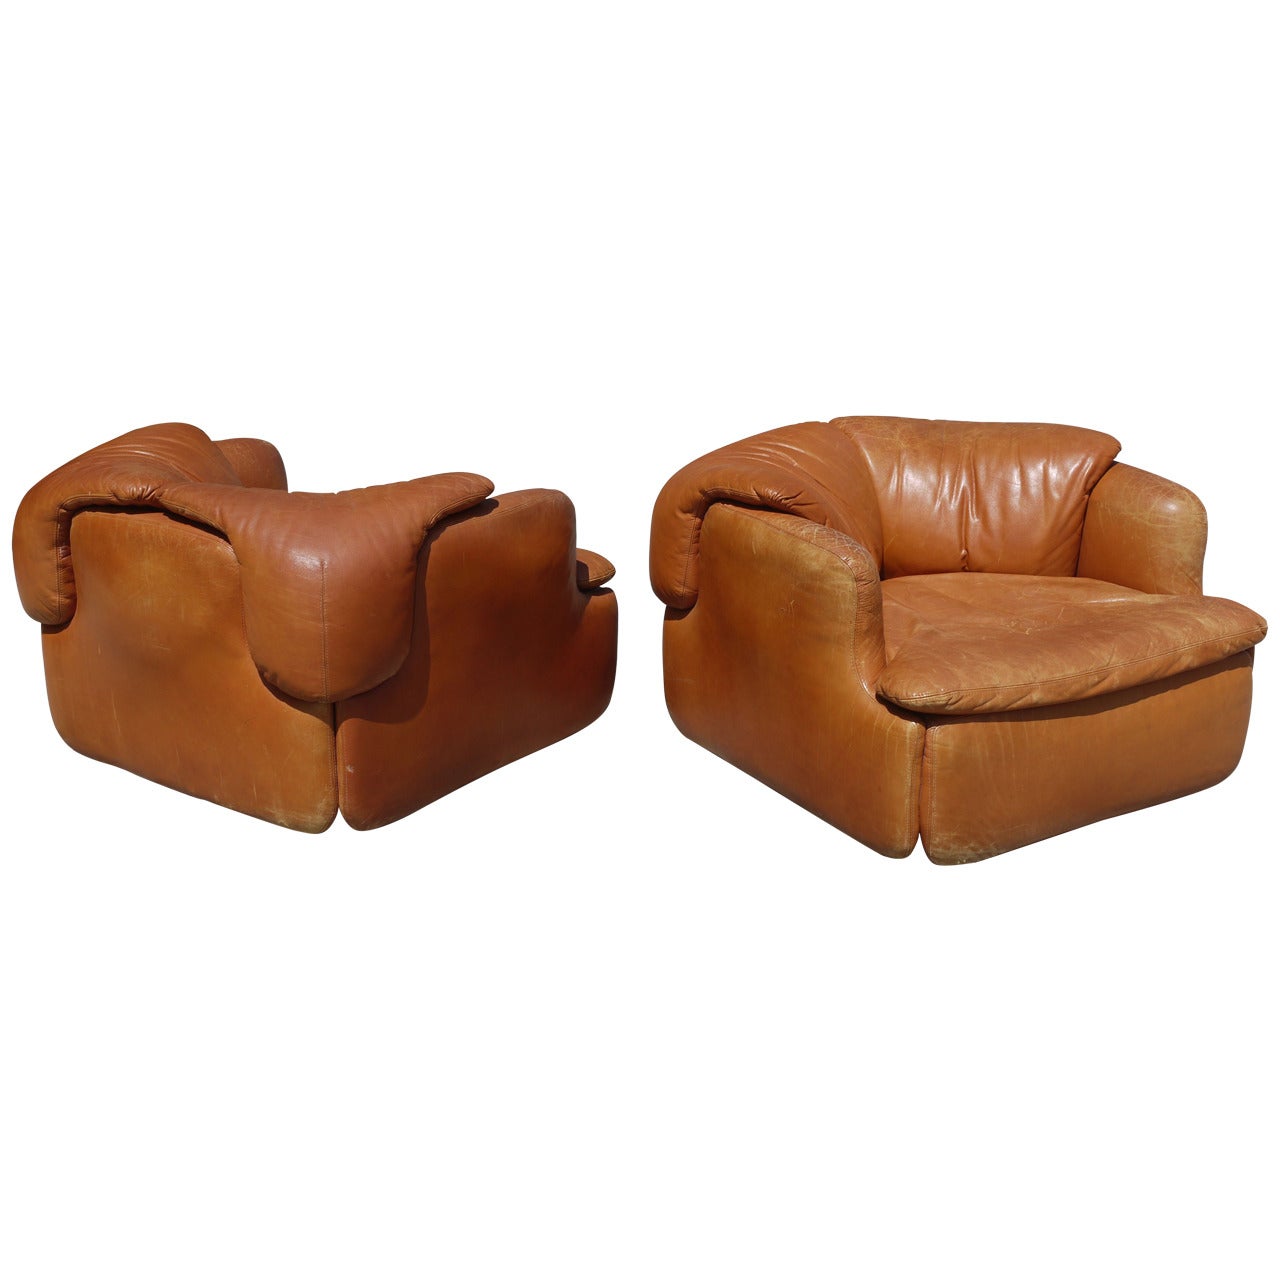 Rare Pair of Leather Chairs by Alberto Rosselli for Saporiti